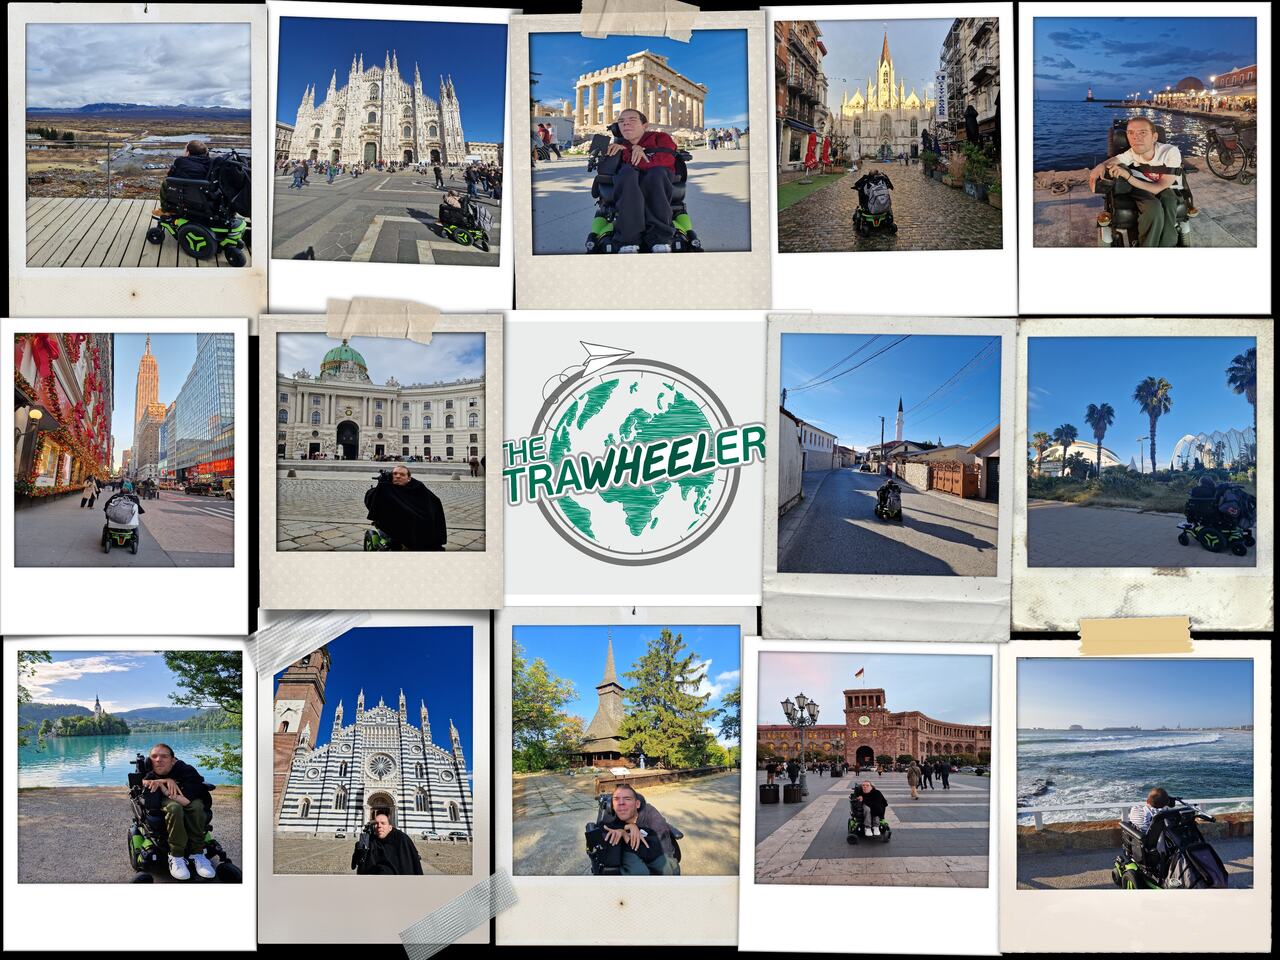 A photo collage of my travels. It has photos from Iceland, Milan, Acropolis, Brussels, Chania, New York, Vienna, Podgorica, Valencia, Slovenia, Monza, Bucharest, Yerevan, Portugal and the Trawheeler logo in the middle.